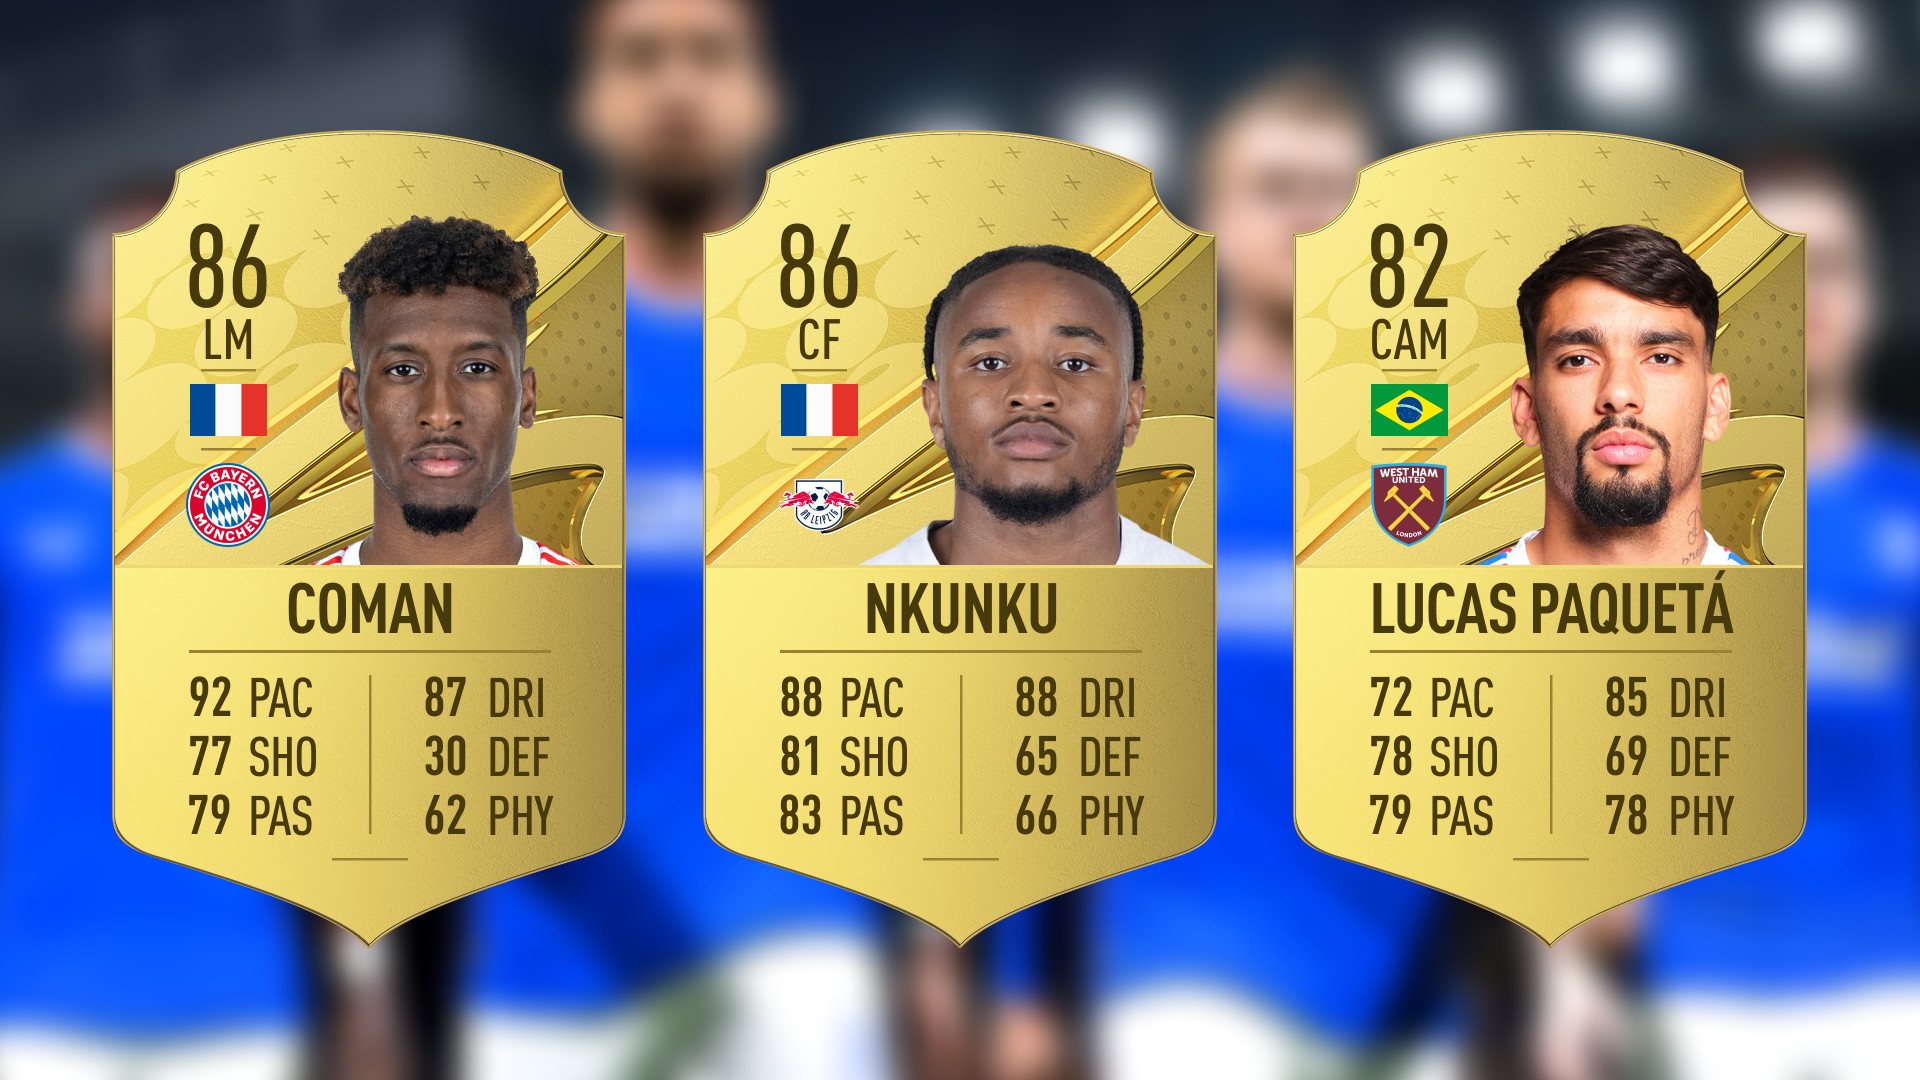 Coman, Nkunku, and Paquetá new FIFA 23 players with 5 star skills